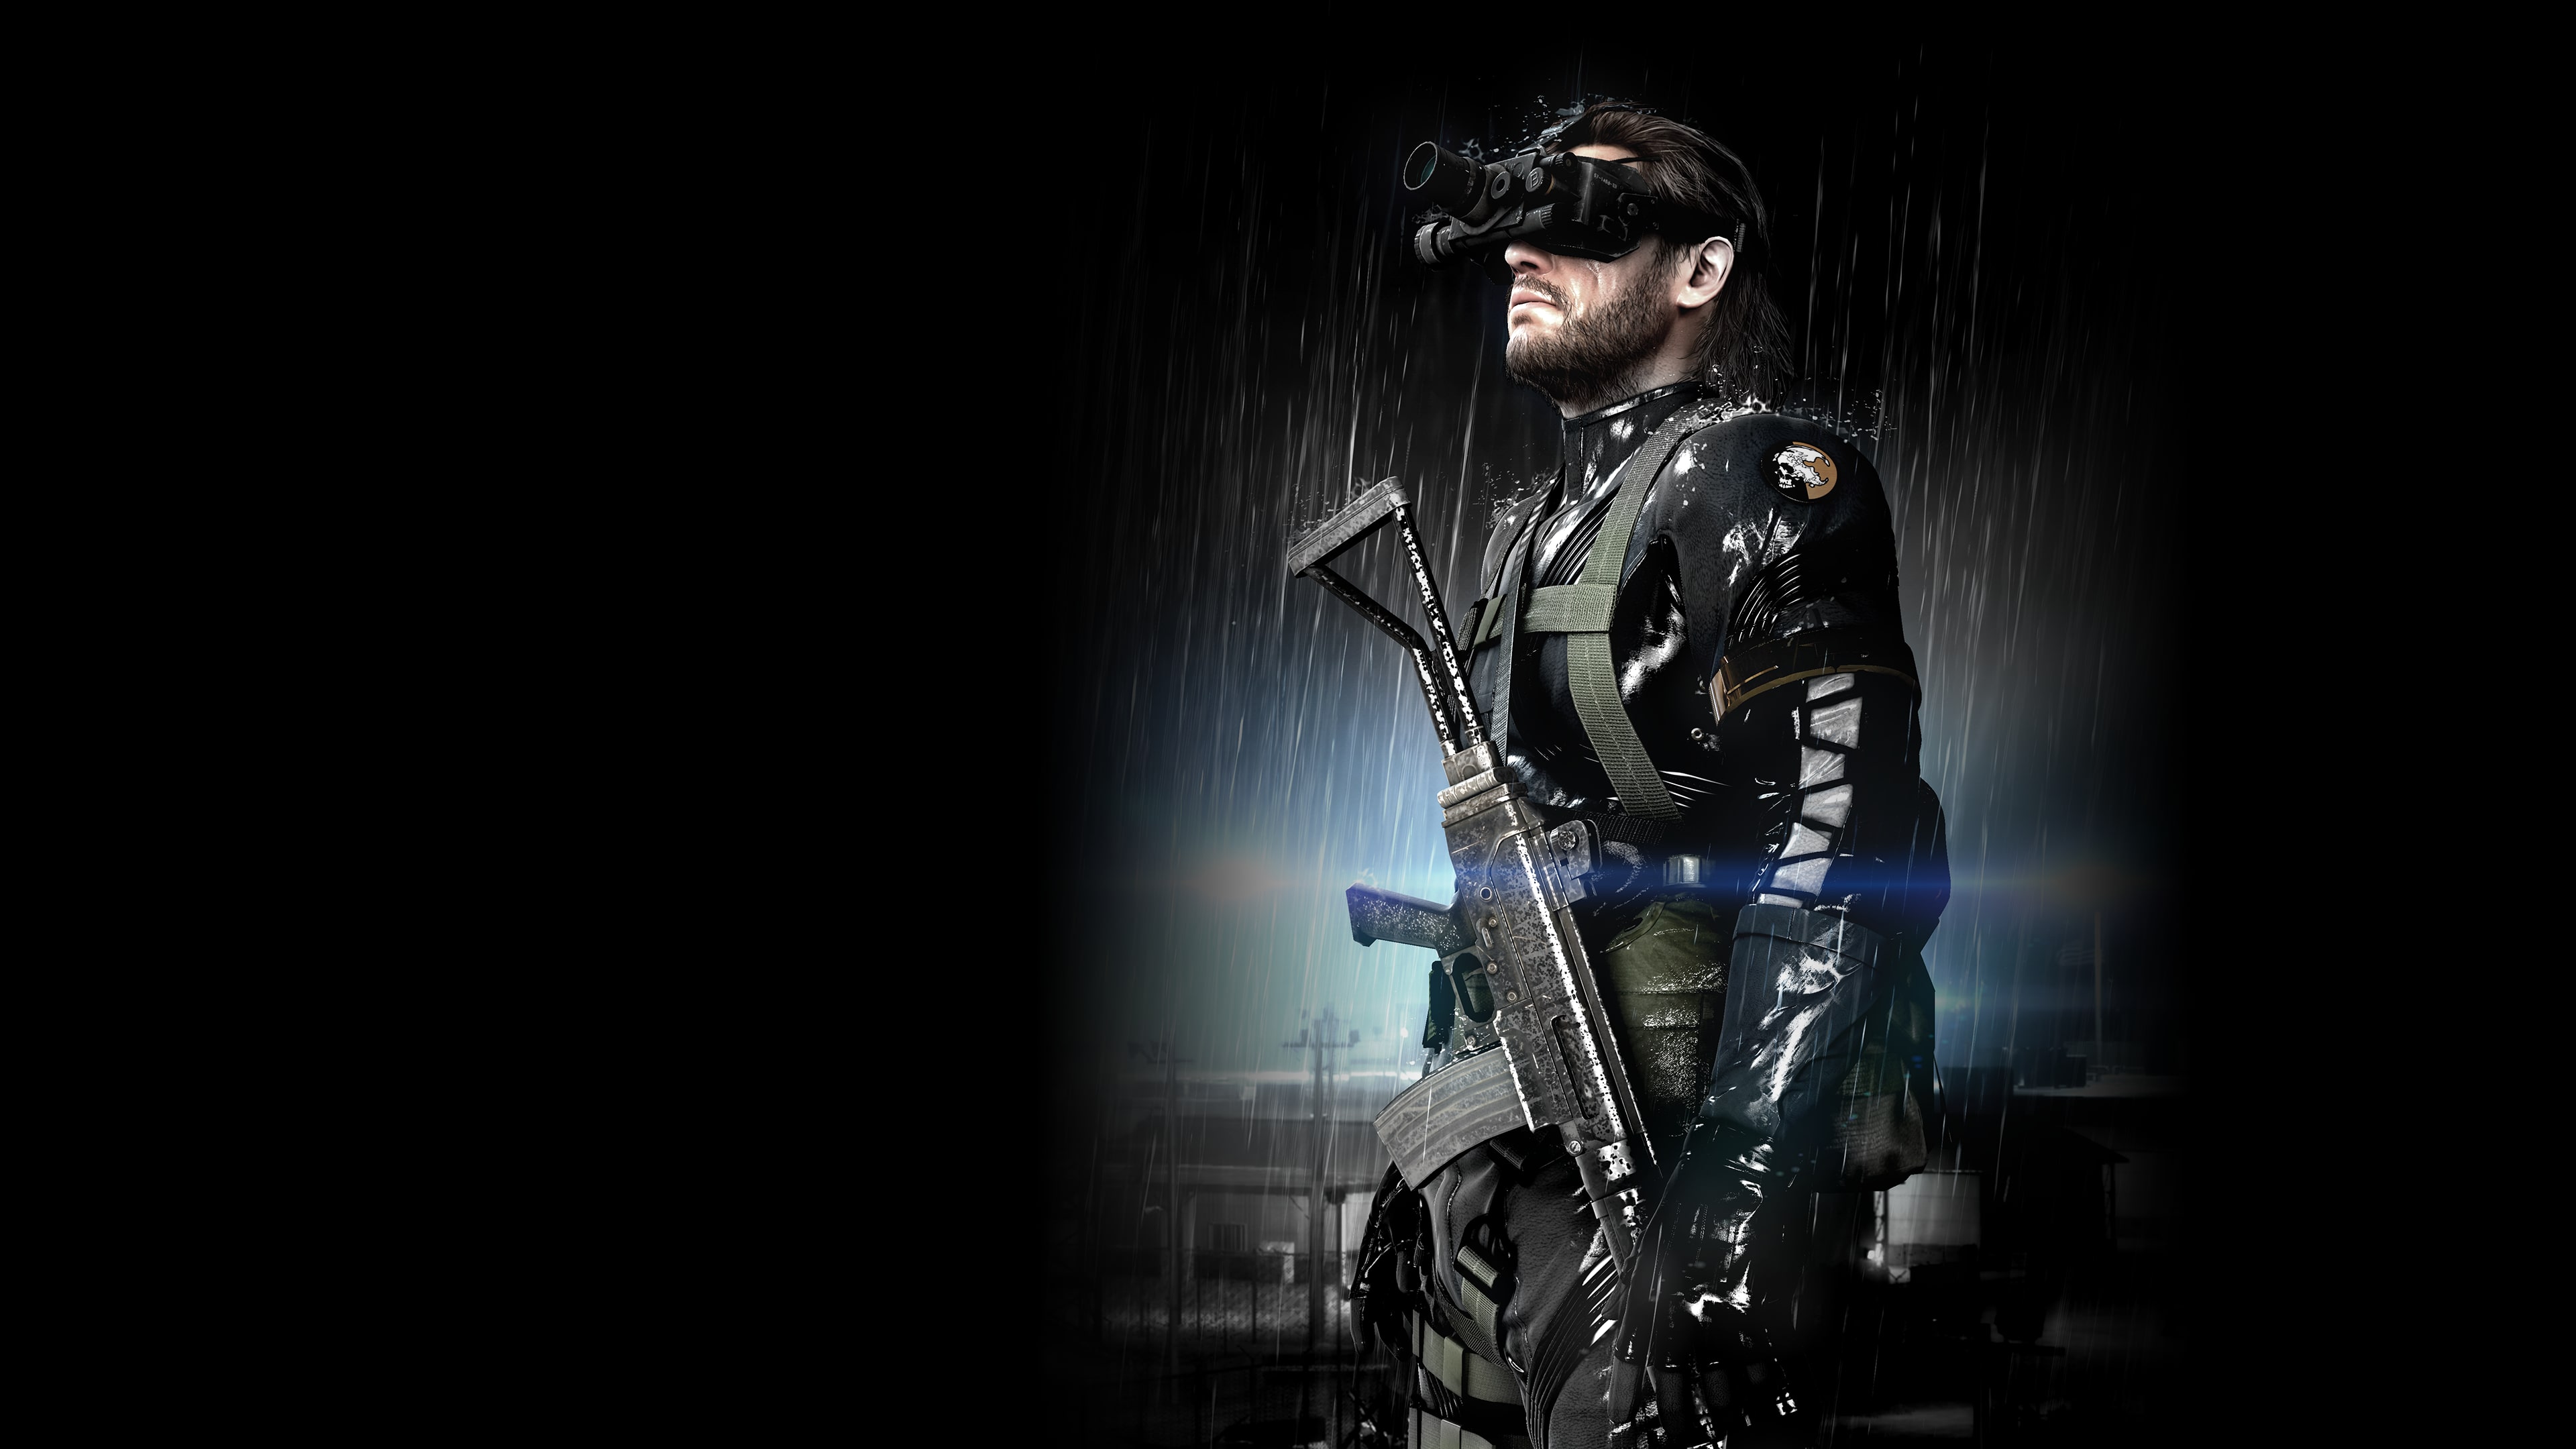 metal gear solid 4 playstation store